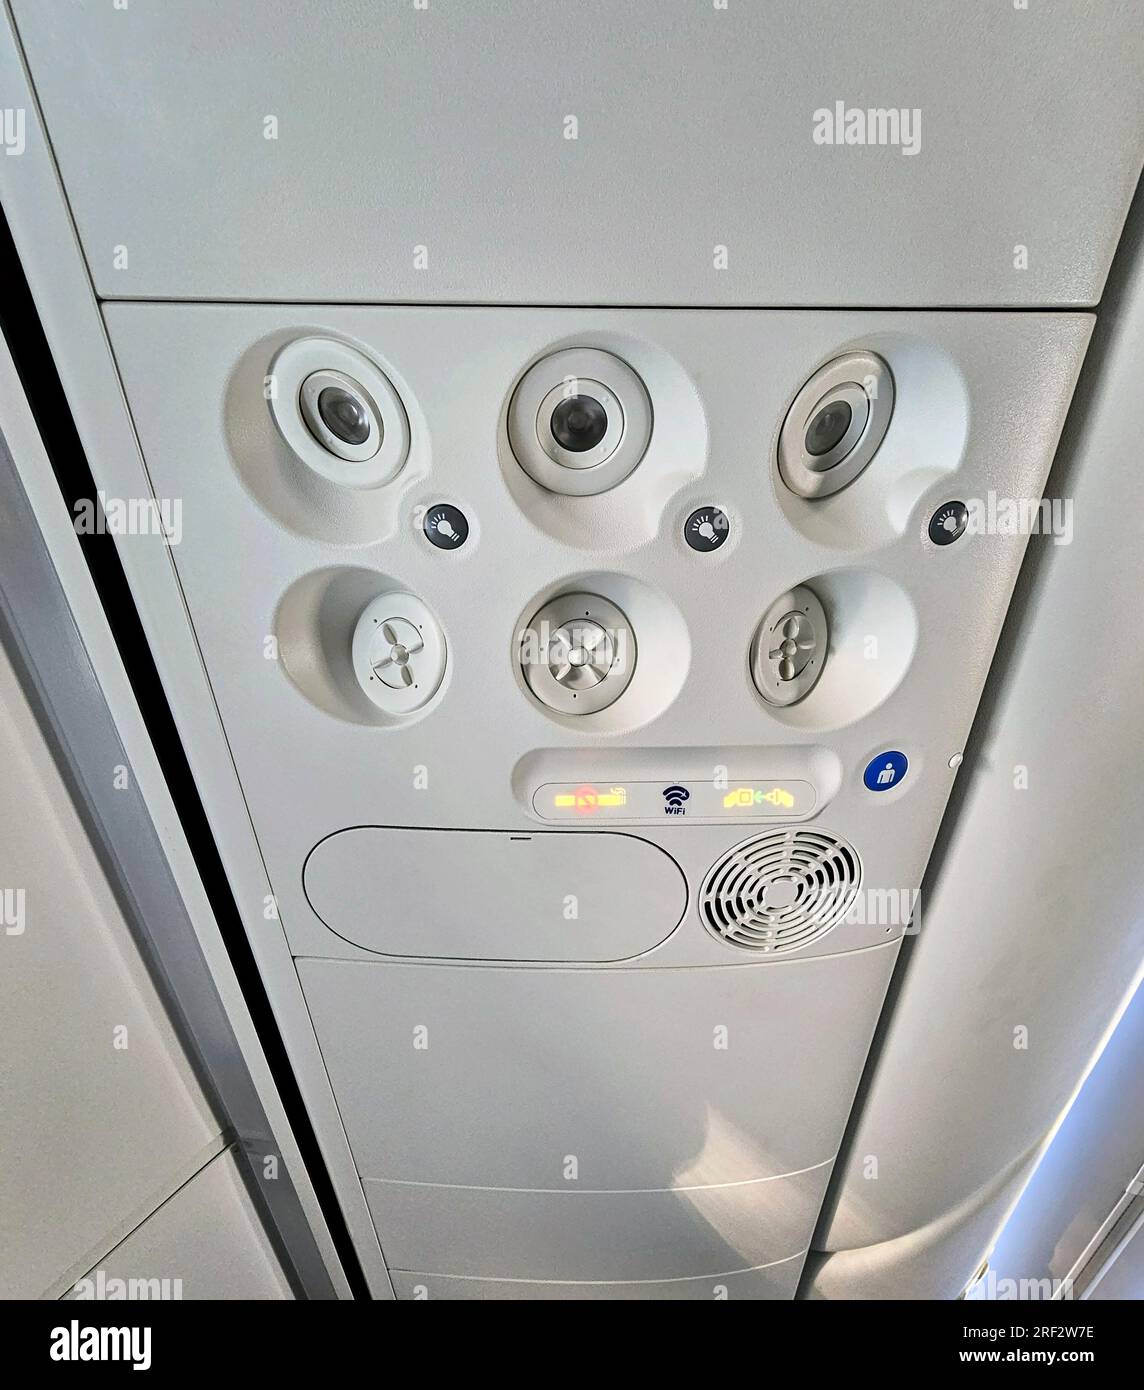 Air condition system on board Boeing Stock Photo